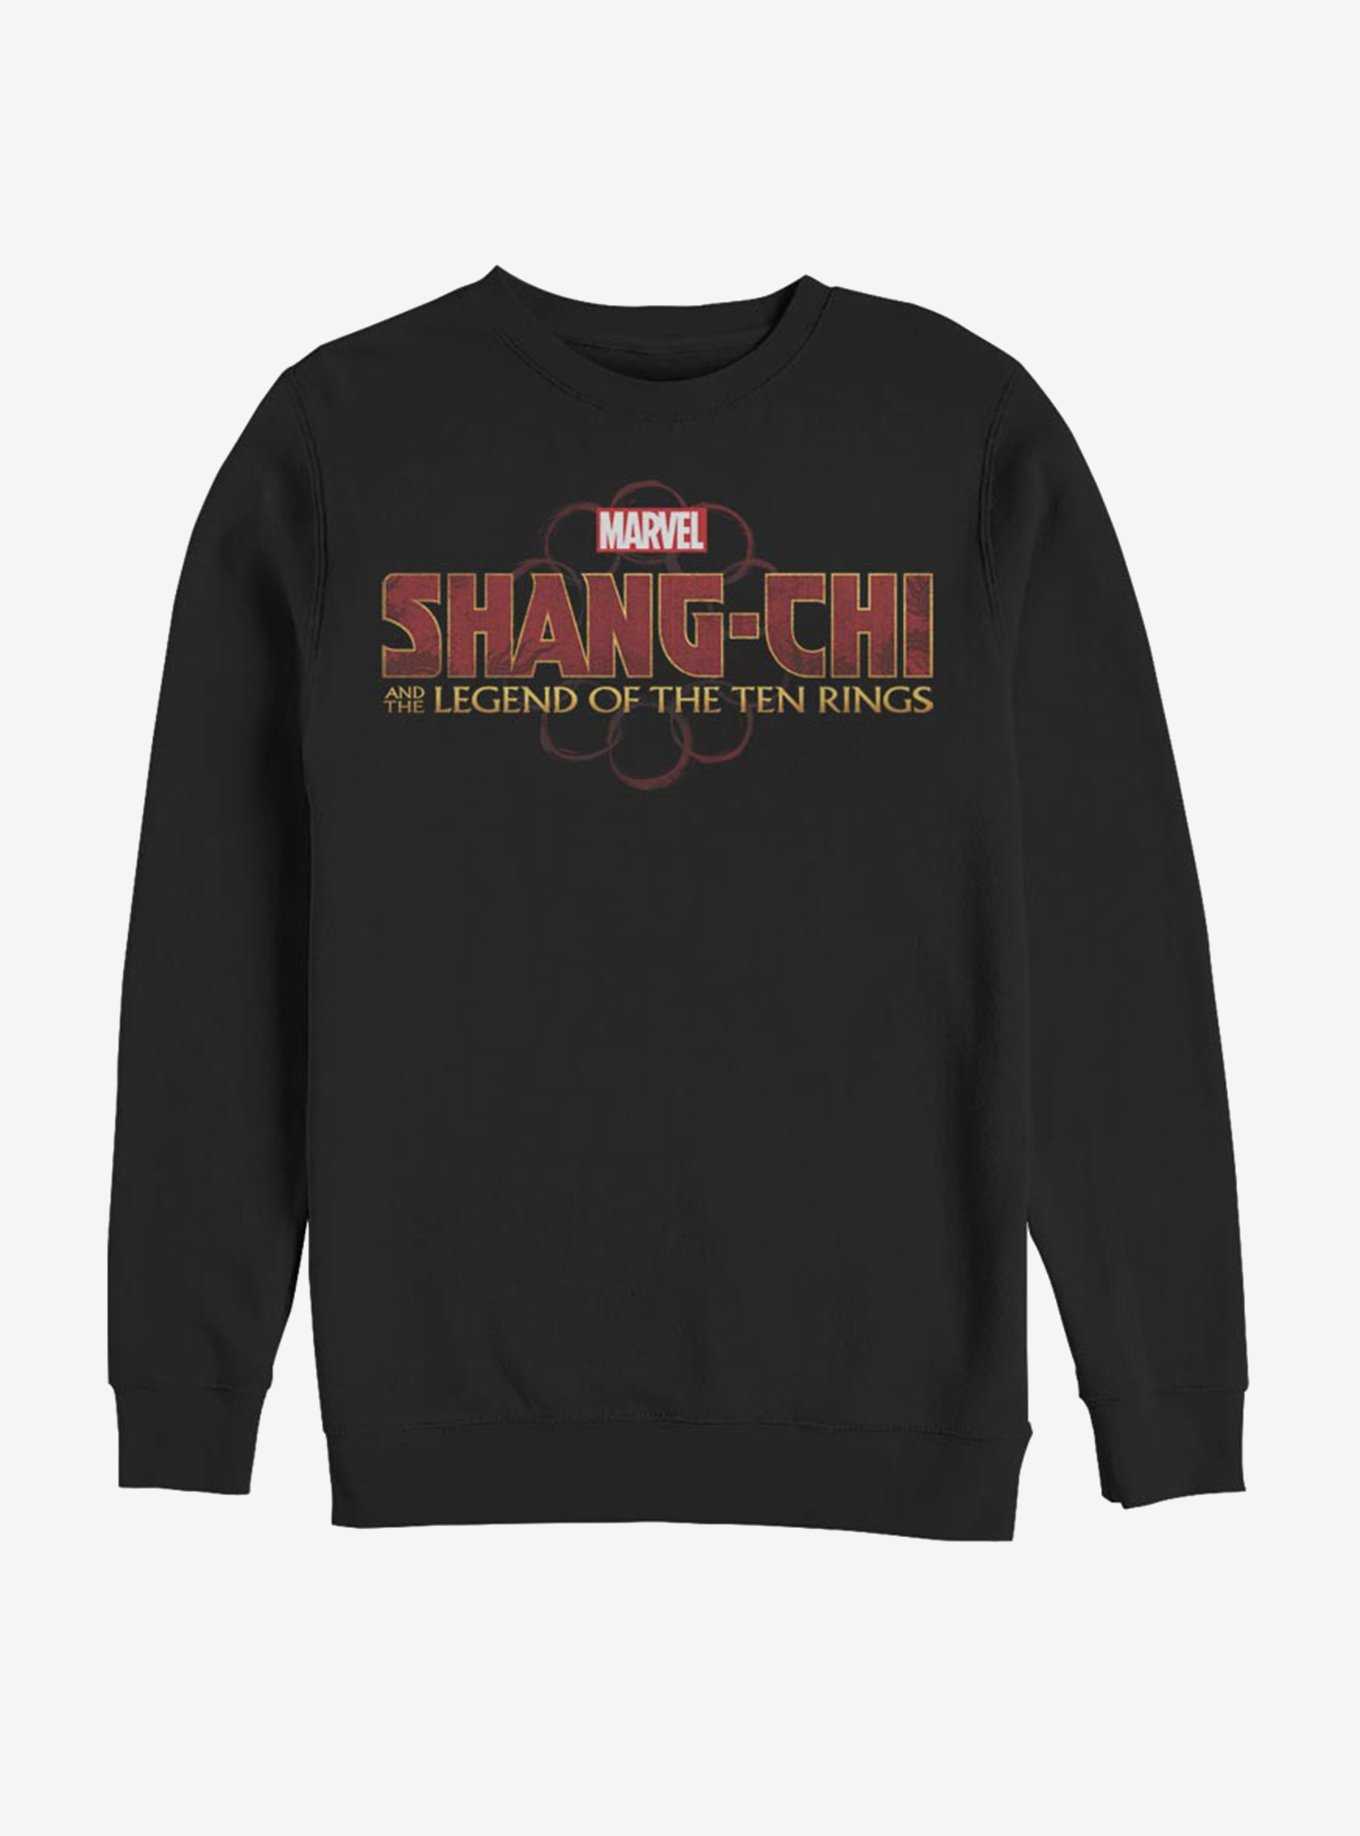 Marvel Shang-Chi And The Legend Of The Ten Rings Sweatshirt, , hi-res